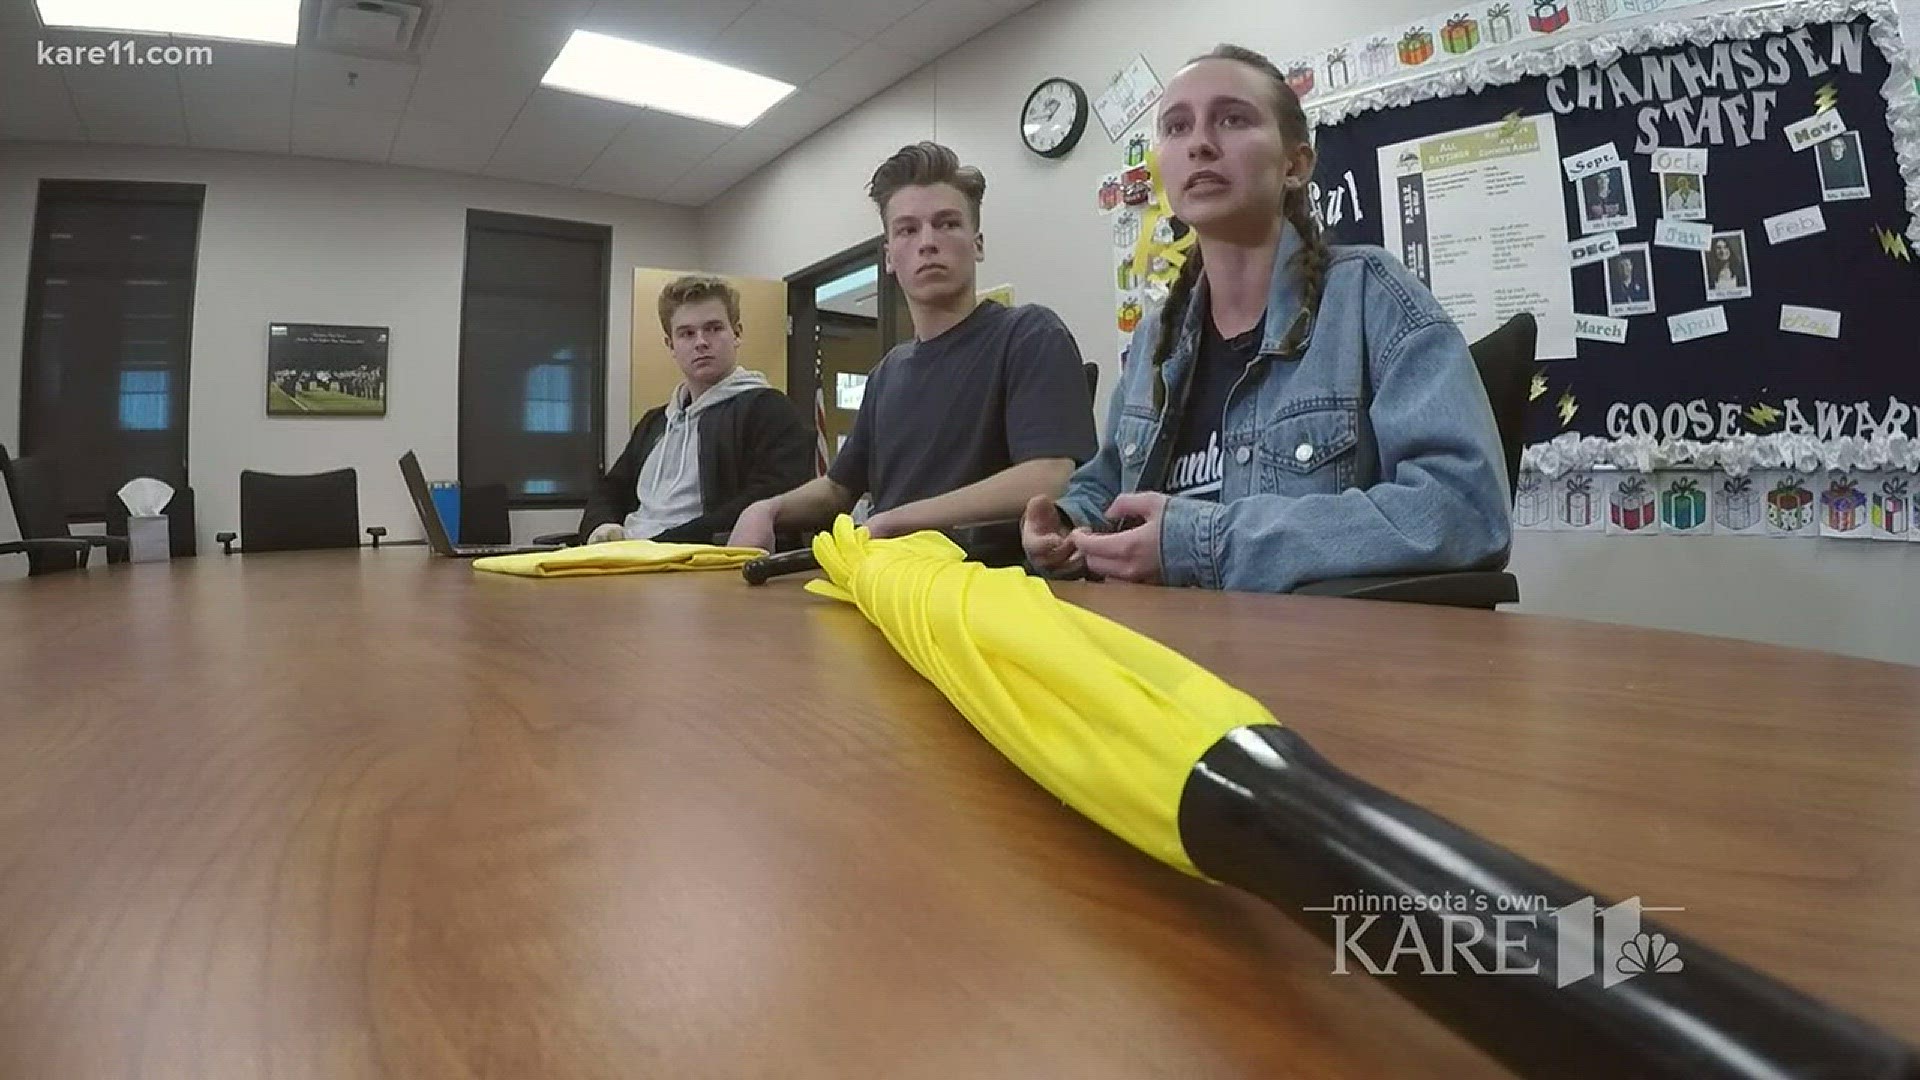 Business students at Chanhassen High school want to "stop the stigma" about mental health. As Heidi Wigdahl explains, the goal is to get their classmates to open up.